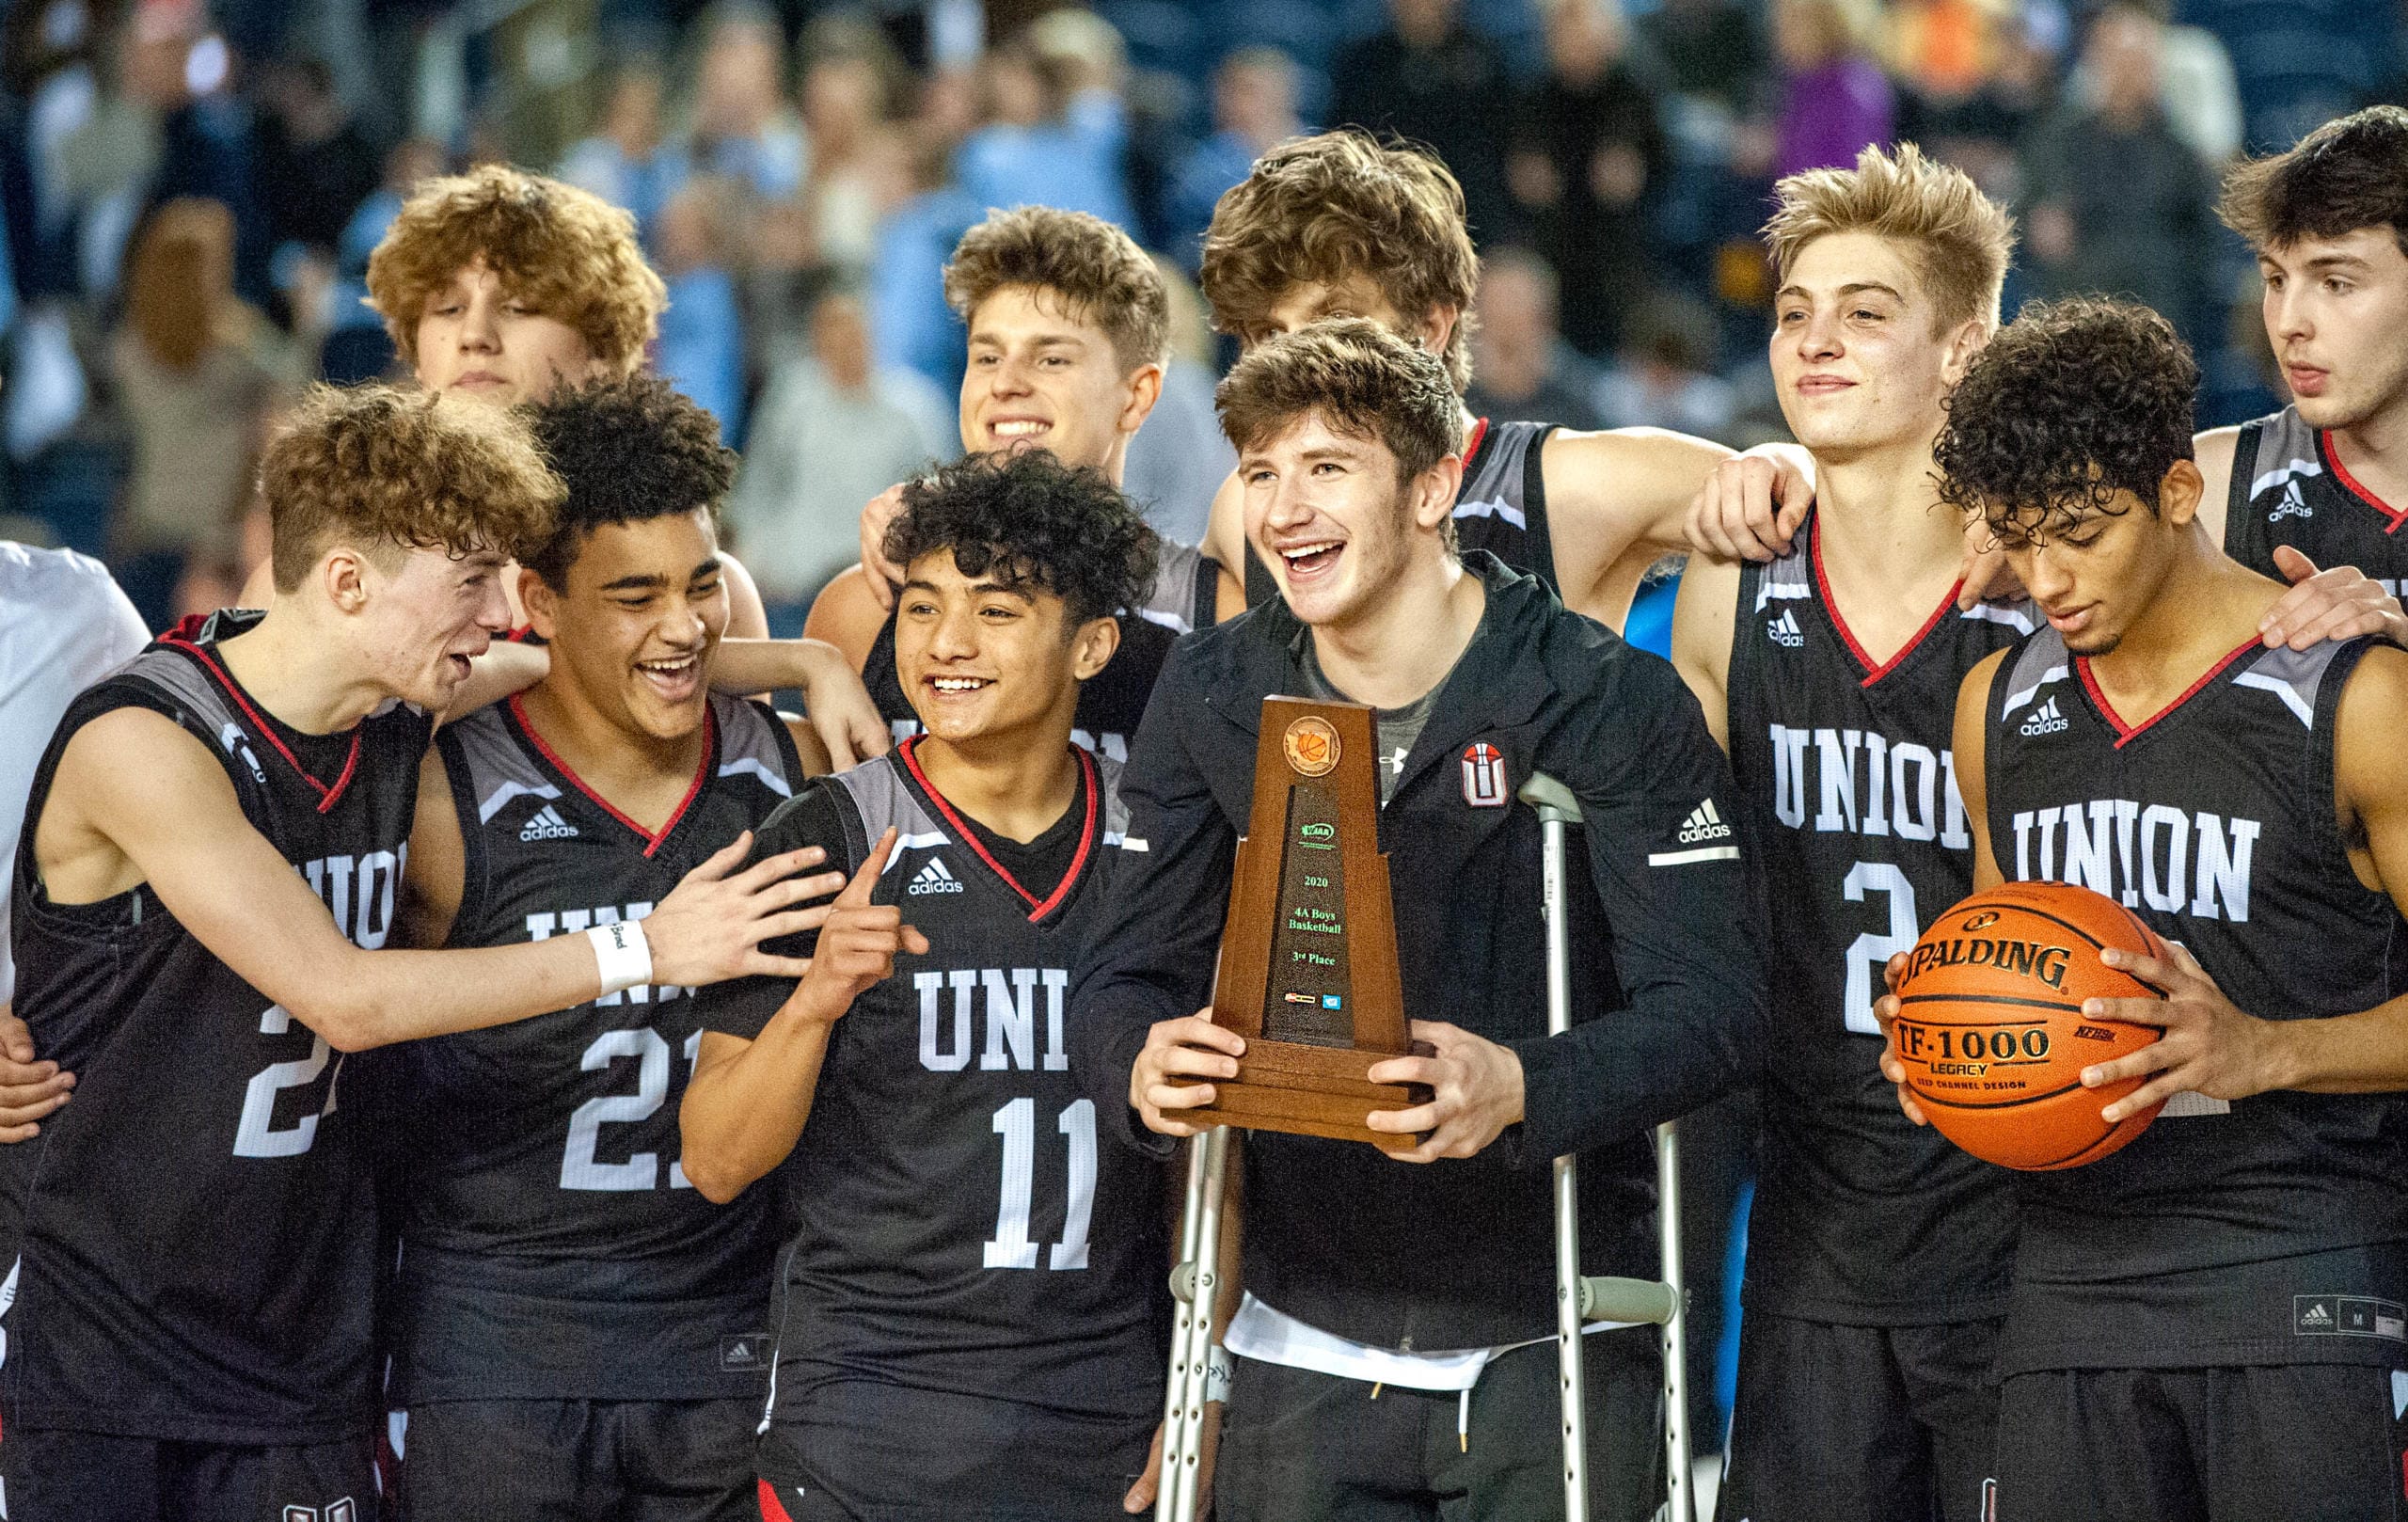 Union players, from left to right (front row) Kaden Horn, Jamison Limbrick, Izaiah Vongnath, Tanner Toolson and Ariya Briscoe celebrate their third-place trophy on Saturday at the Tacoma Dome.